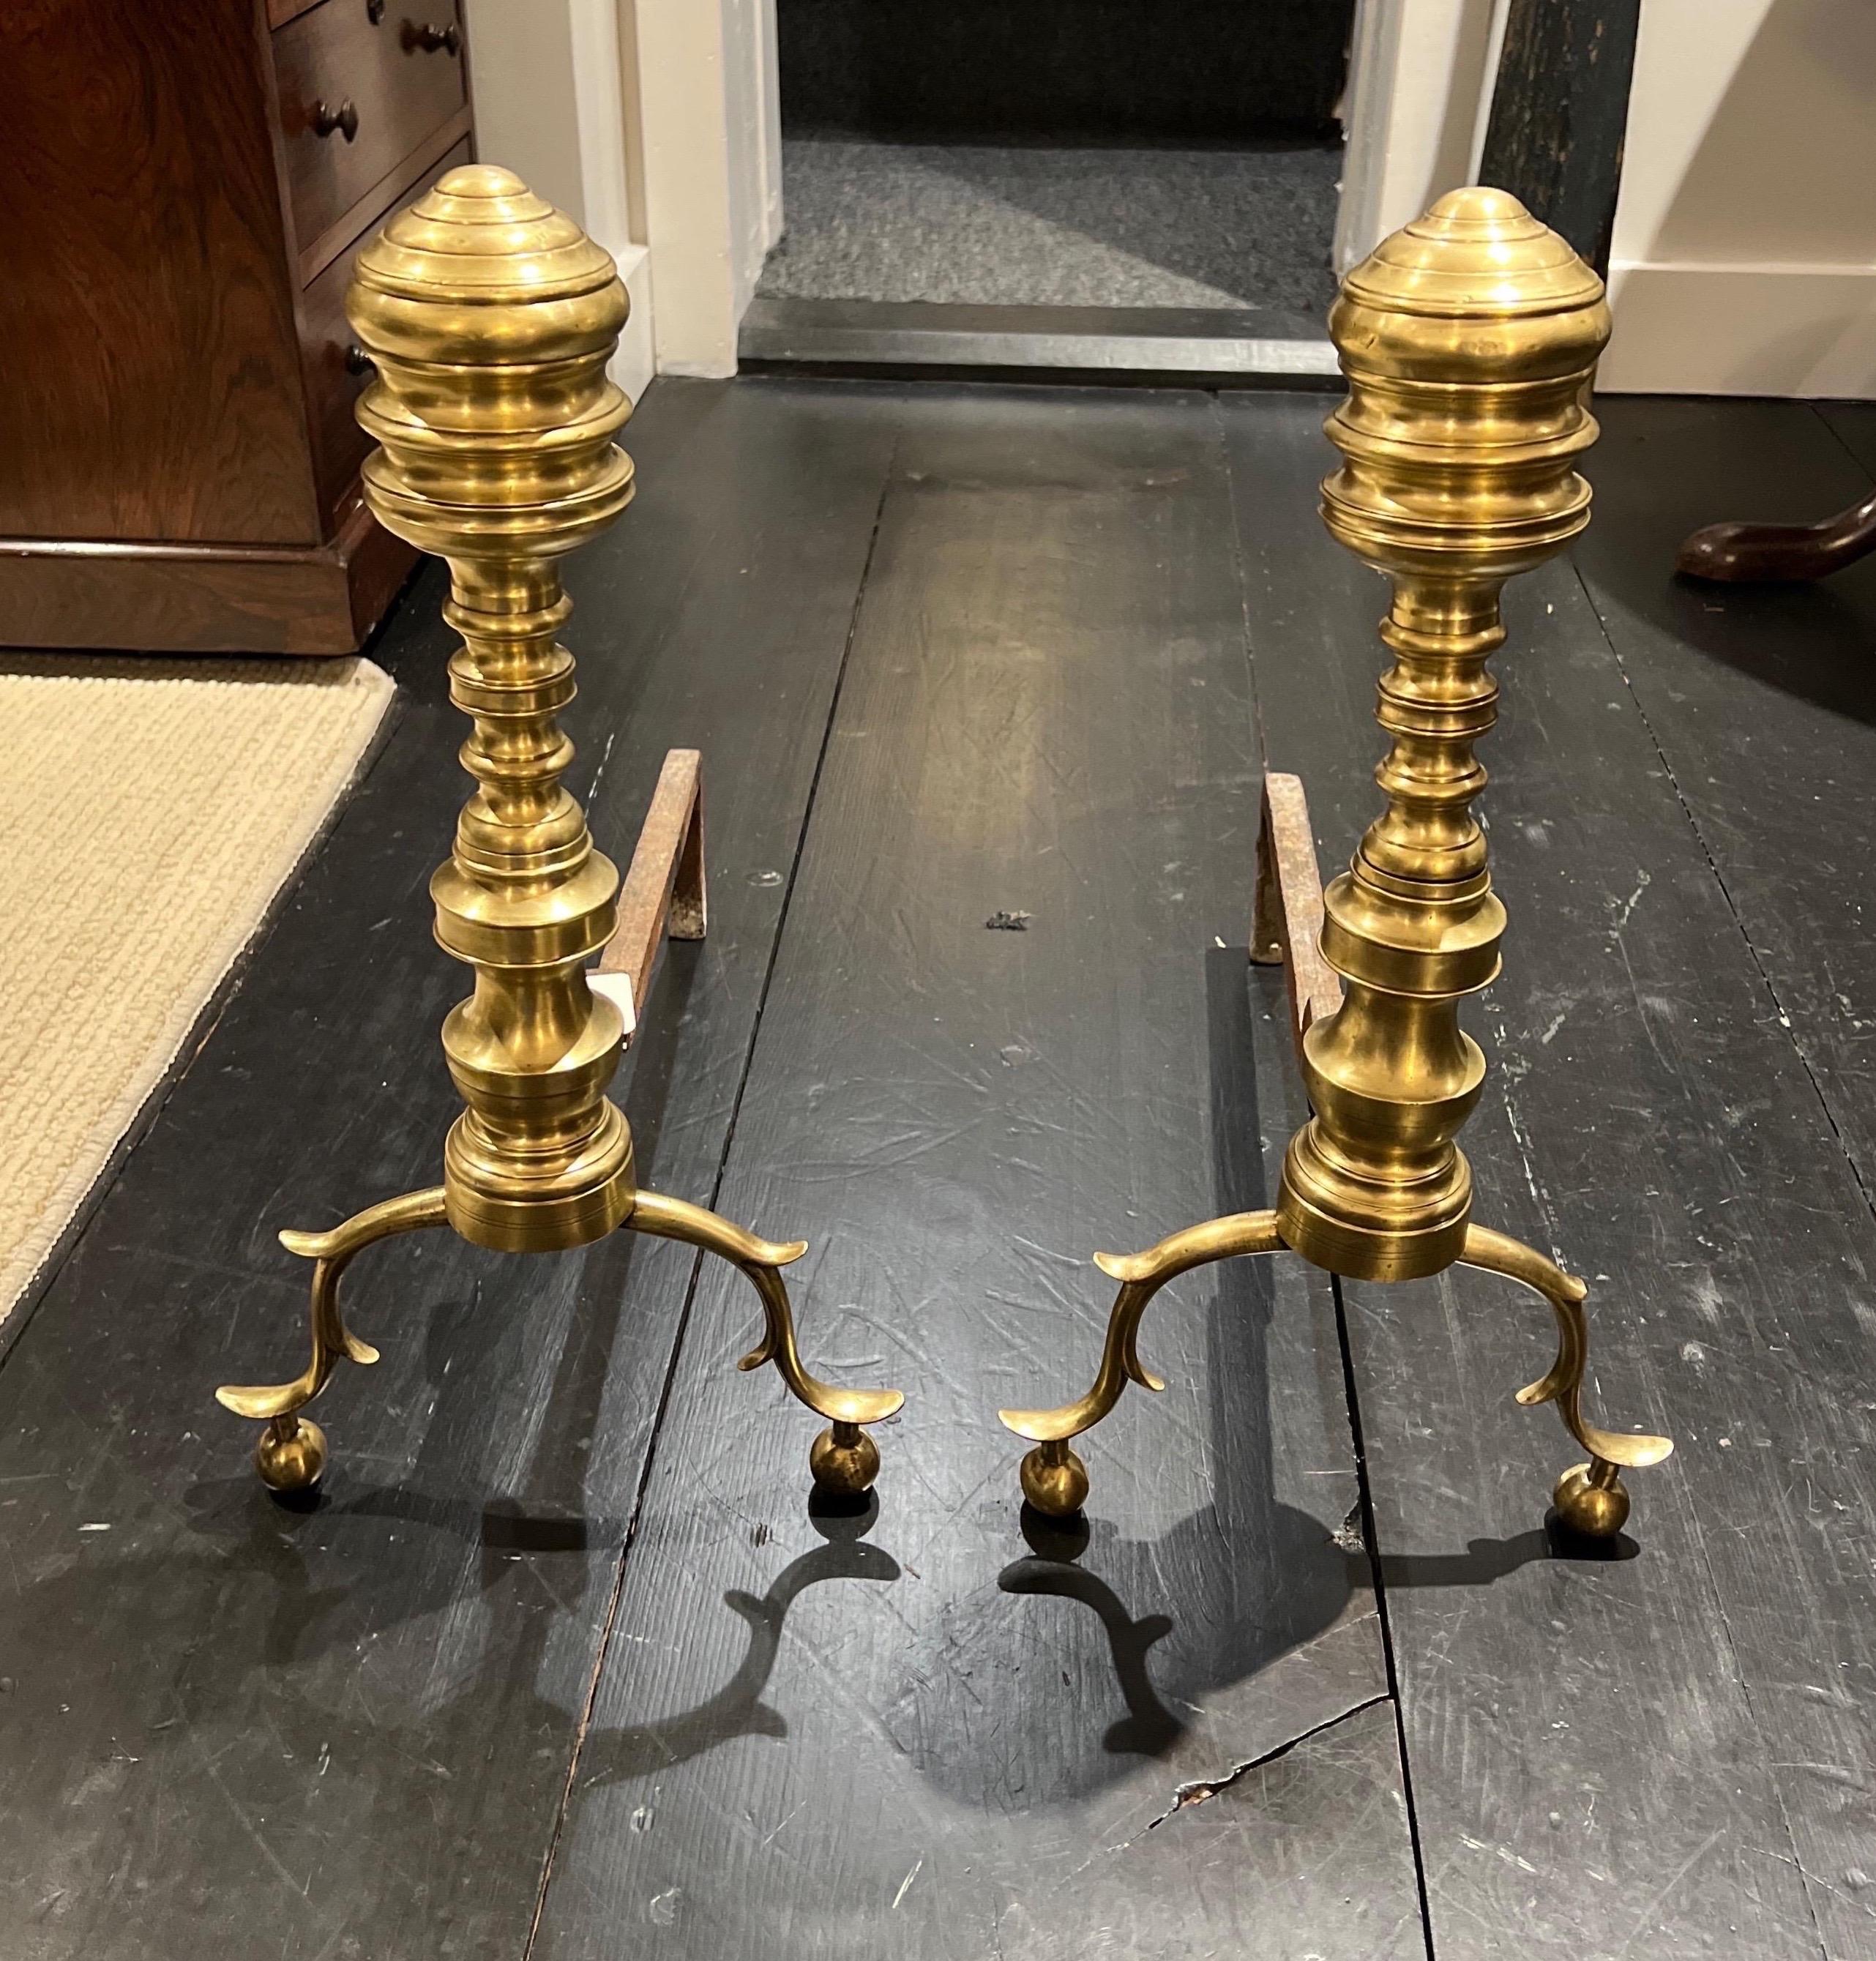 A Pair of American Federal Period finial form brass andirons, both showing turned finial capitals on sectional columns rising from double spurred and hipped supports, both retaining their original forged iron 'dogs',

The brass having a fine patina,